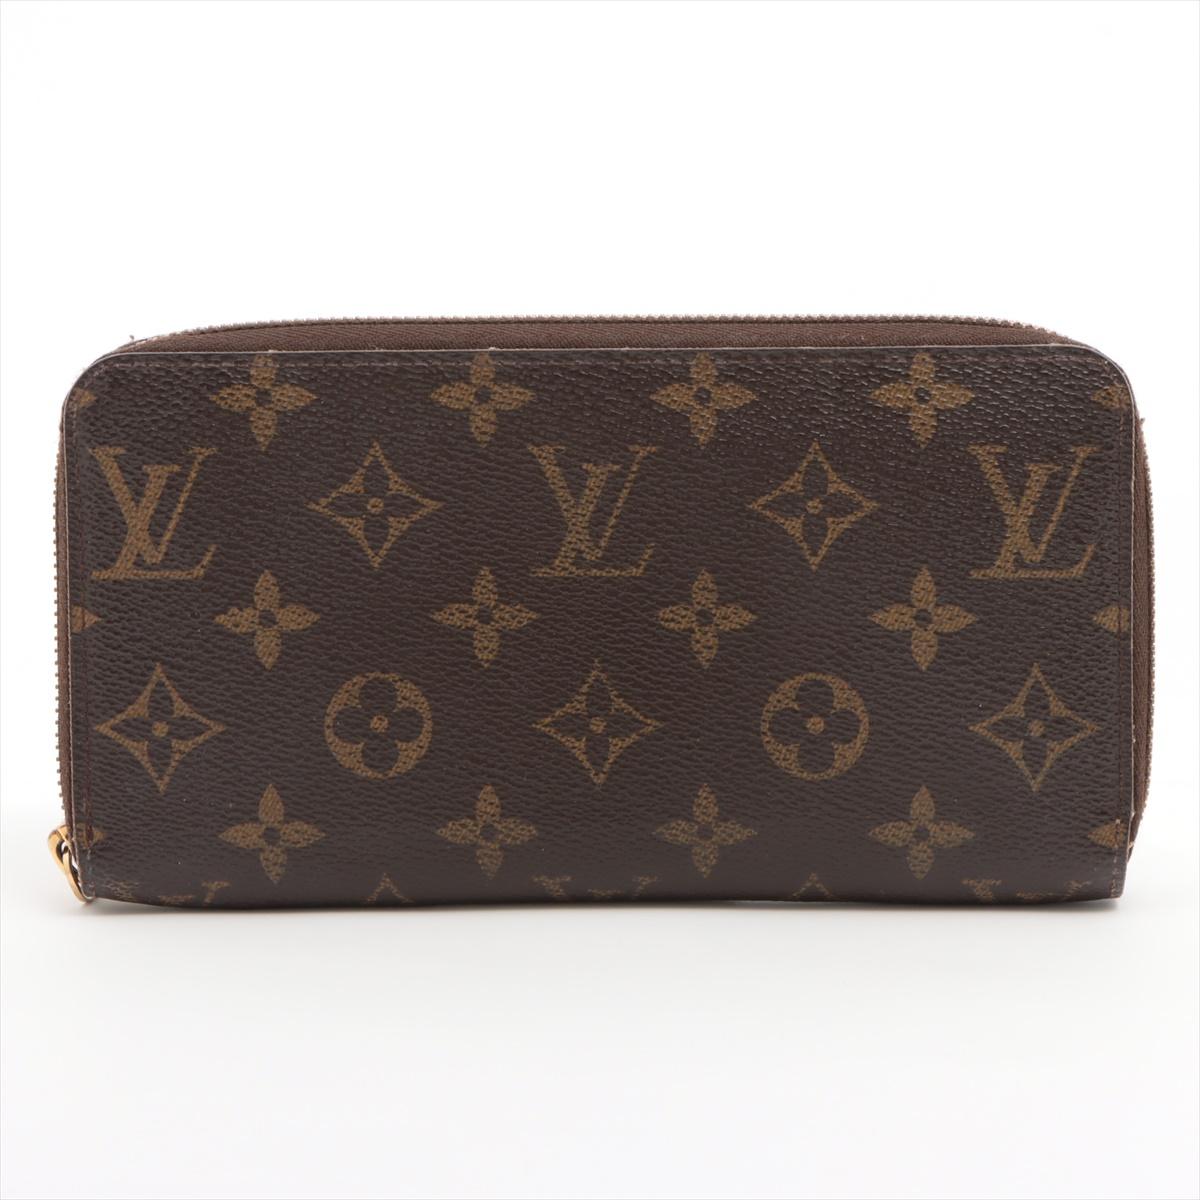 The Louis Vuitton Monogram Zippy Wallet is an iconic and versatile accessory designed for both style and functionality. Crafted from the renowned Monogram canvas, the wallet showcases Louis Vuitton's timeless elegance and craftsmanship. The classic